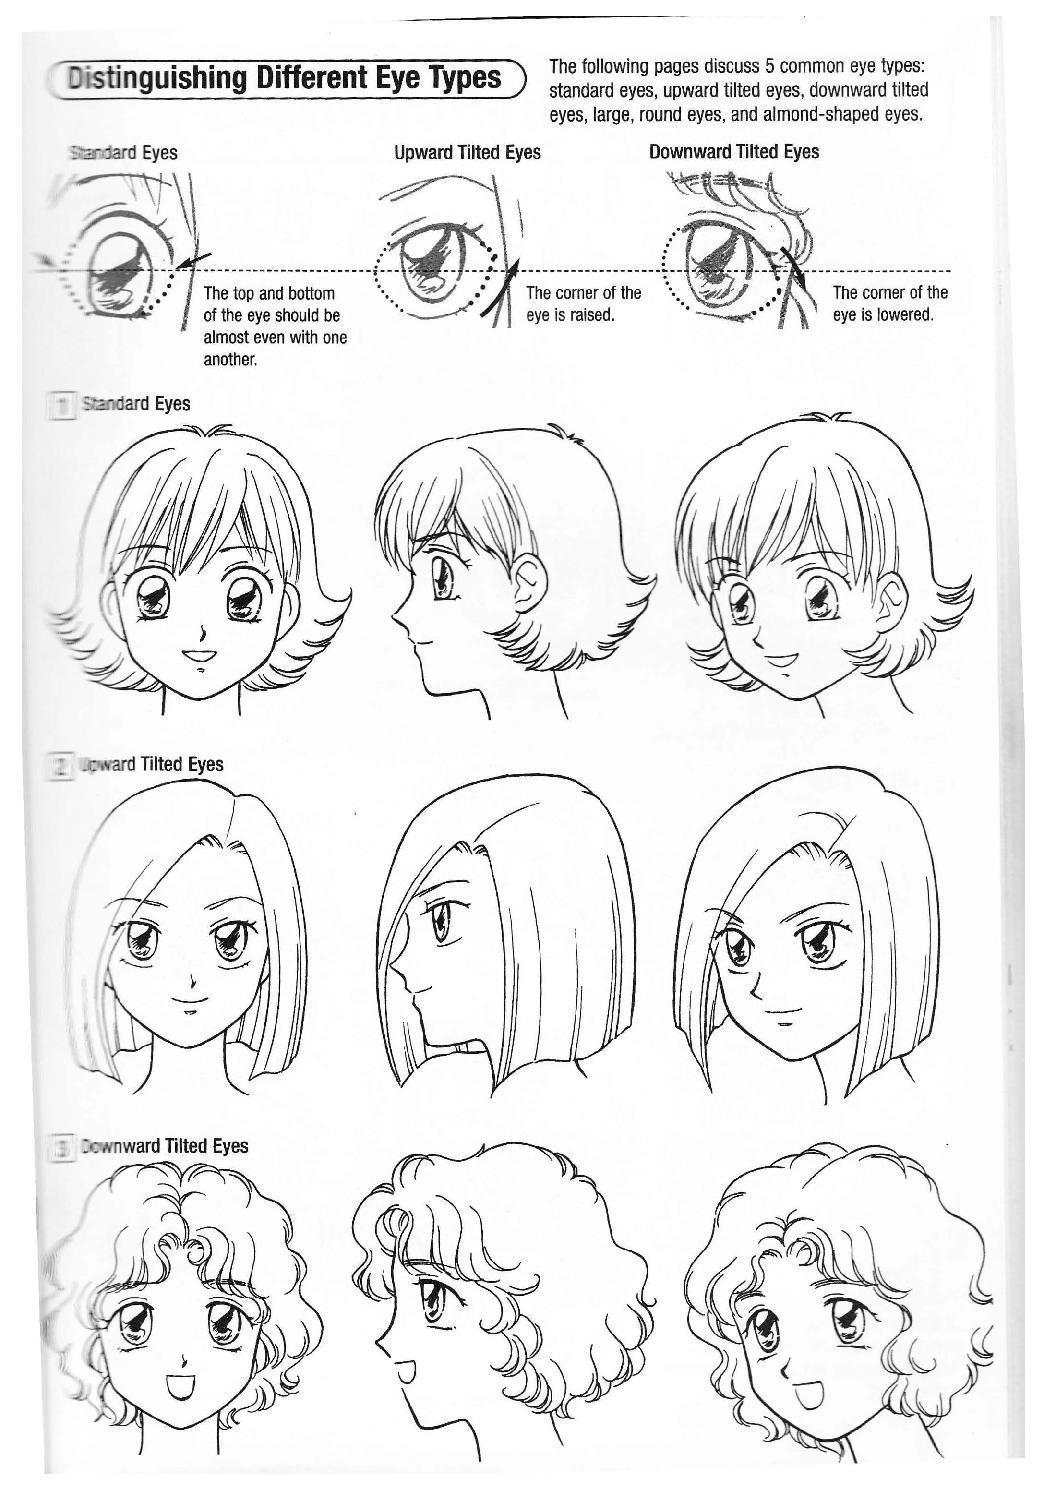 More How to Draw Manga Vol. 2 - Penning Characters 48